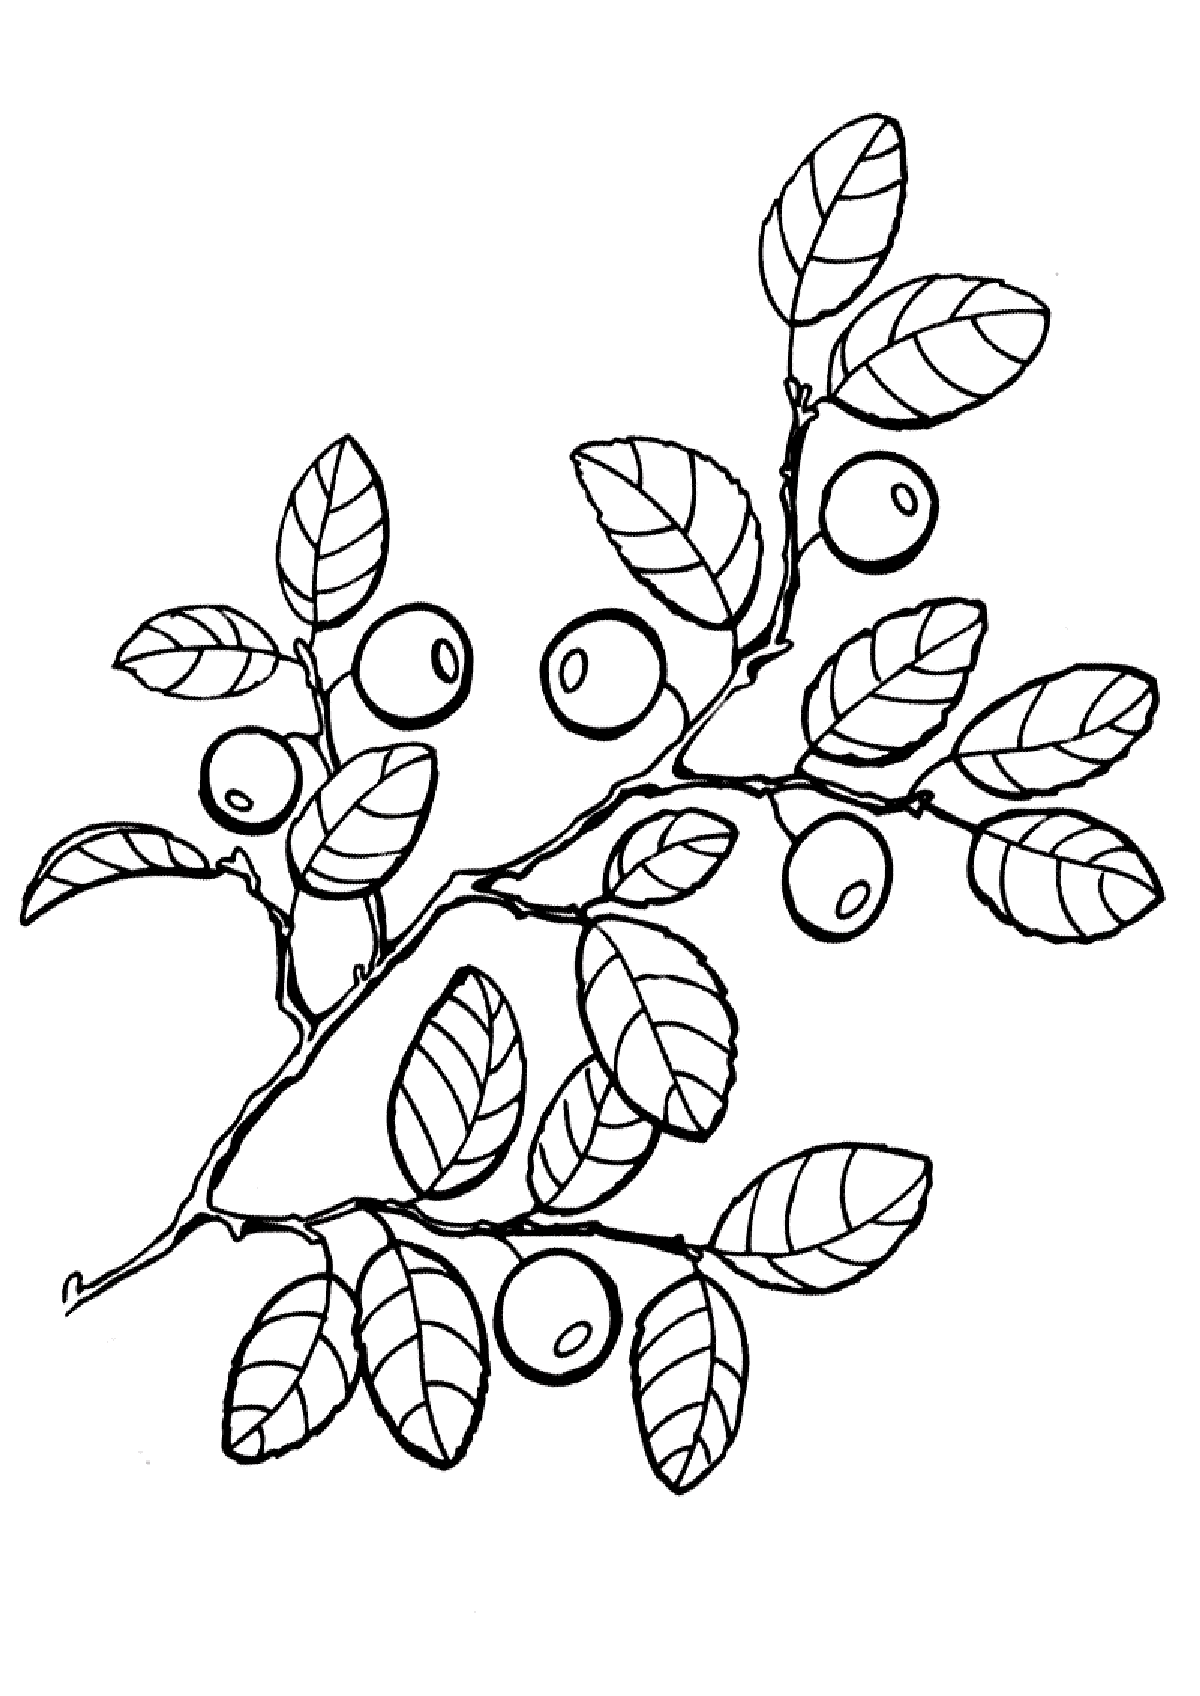 color page berries coloring pages to download and print for free color page 